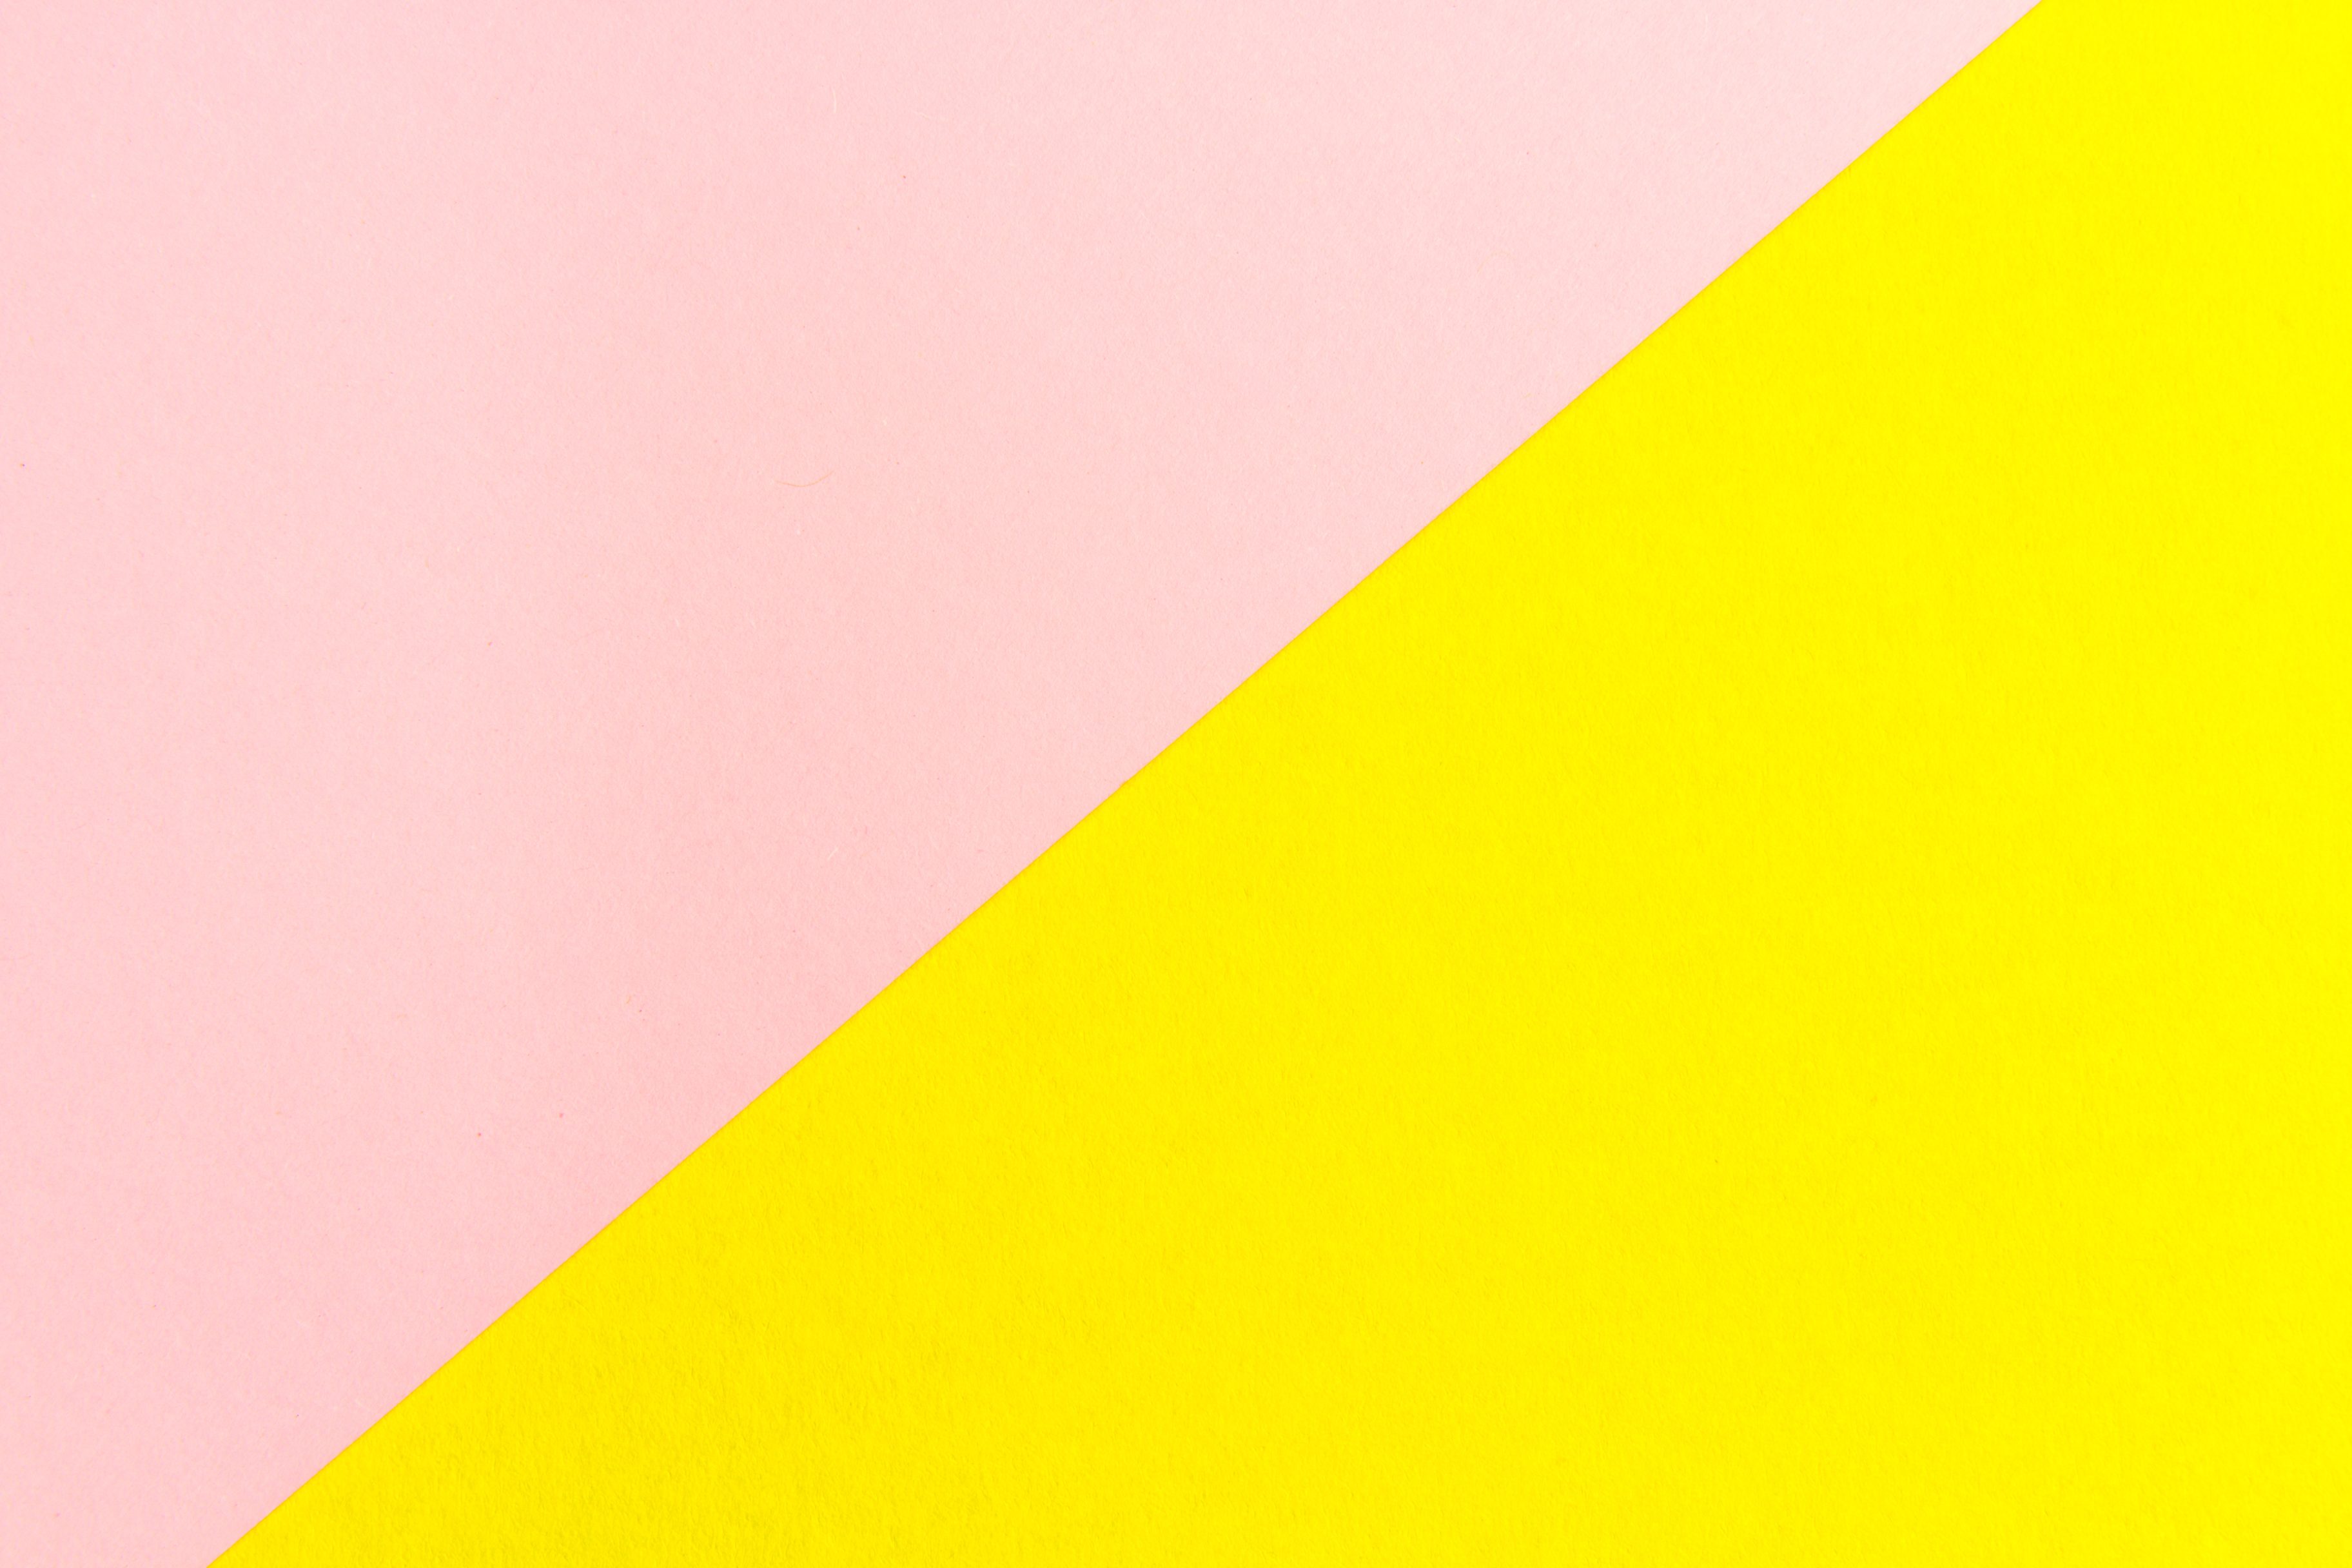 What Color Yellow and Pink Make When Mixed?